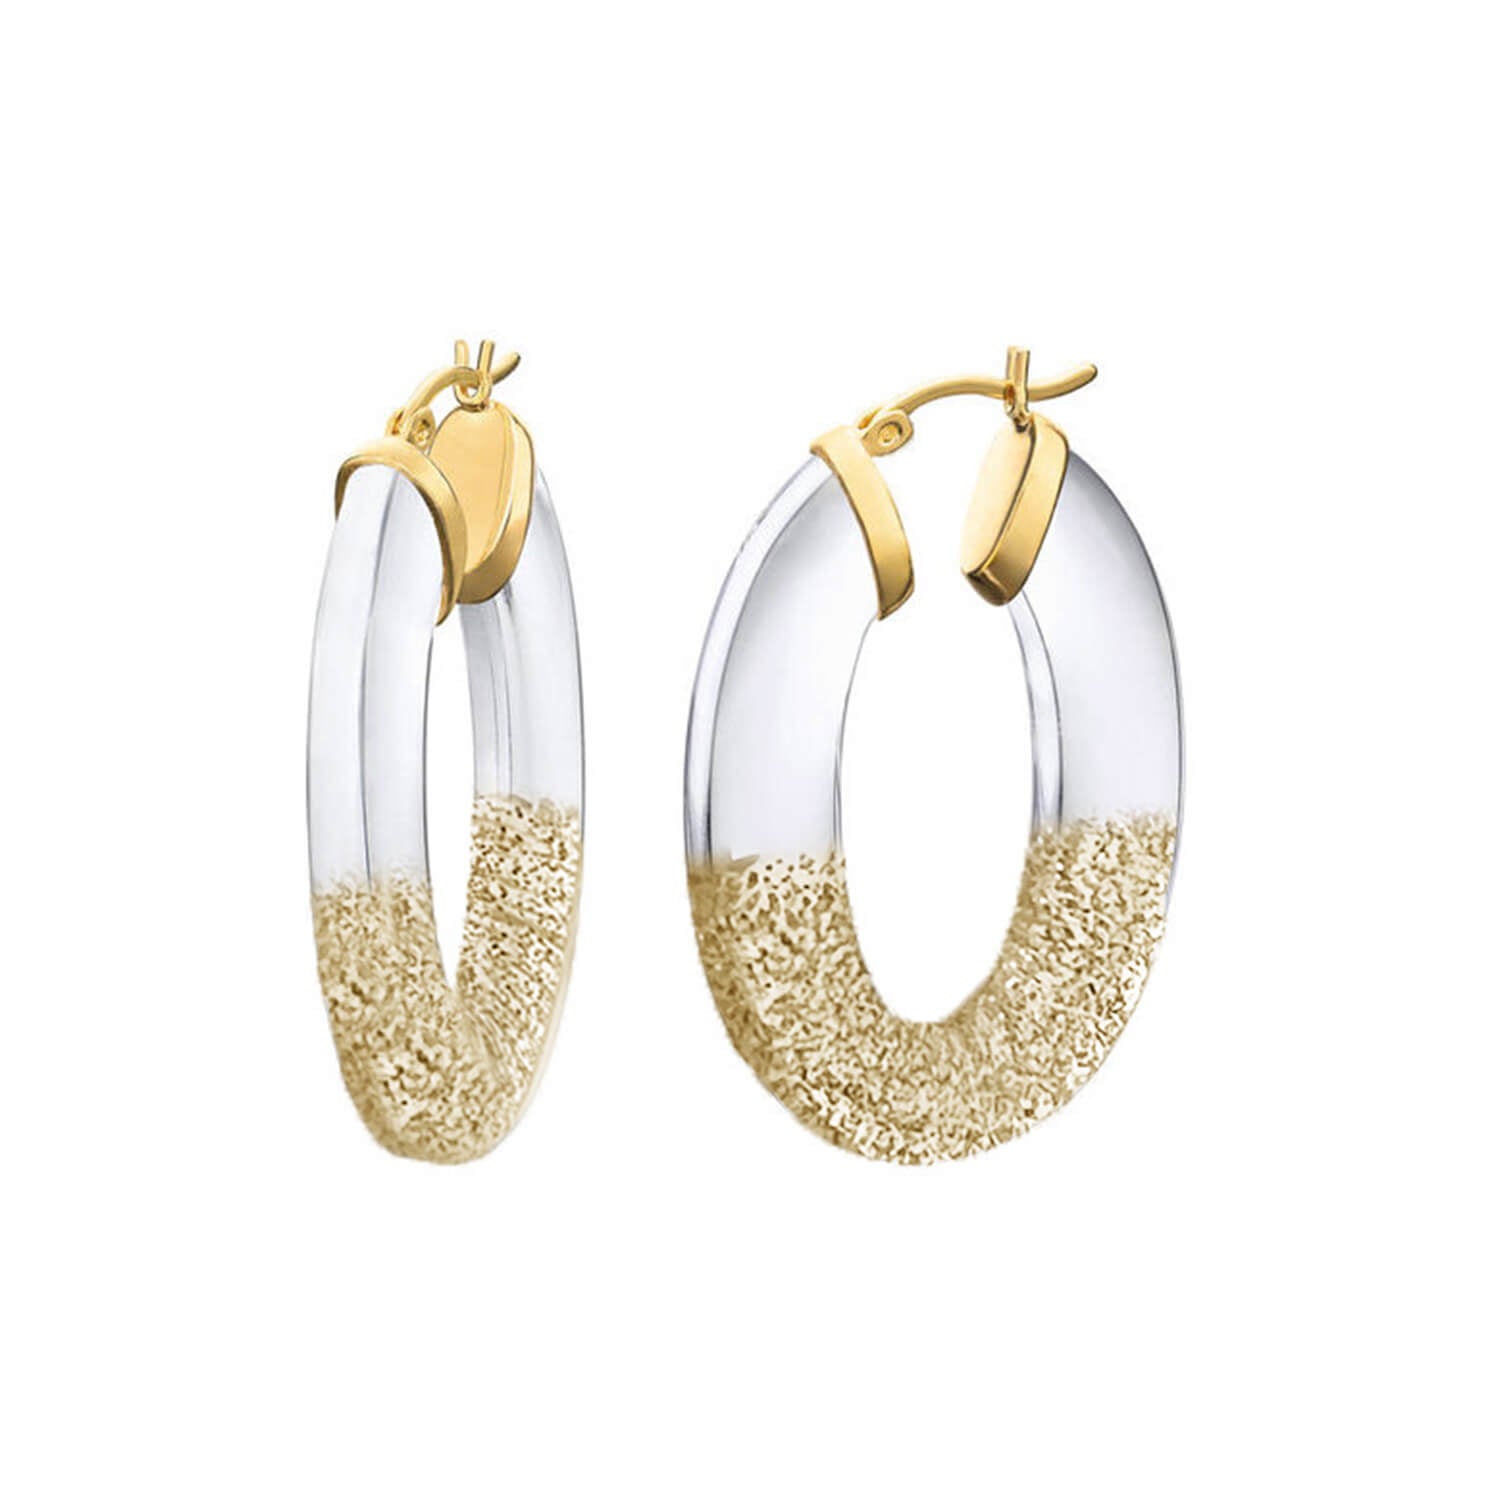 Clear Lucite Earrings with Gold Glitter